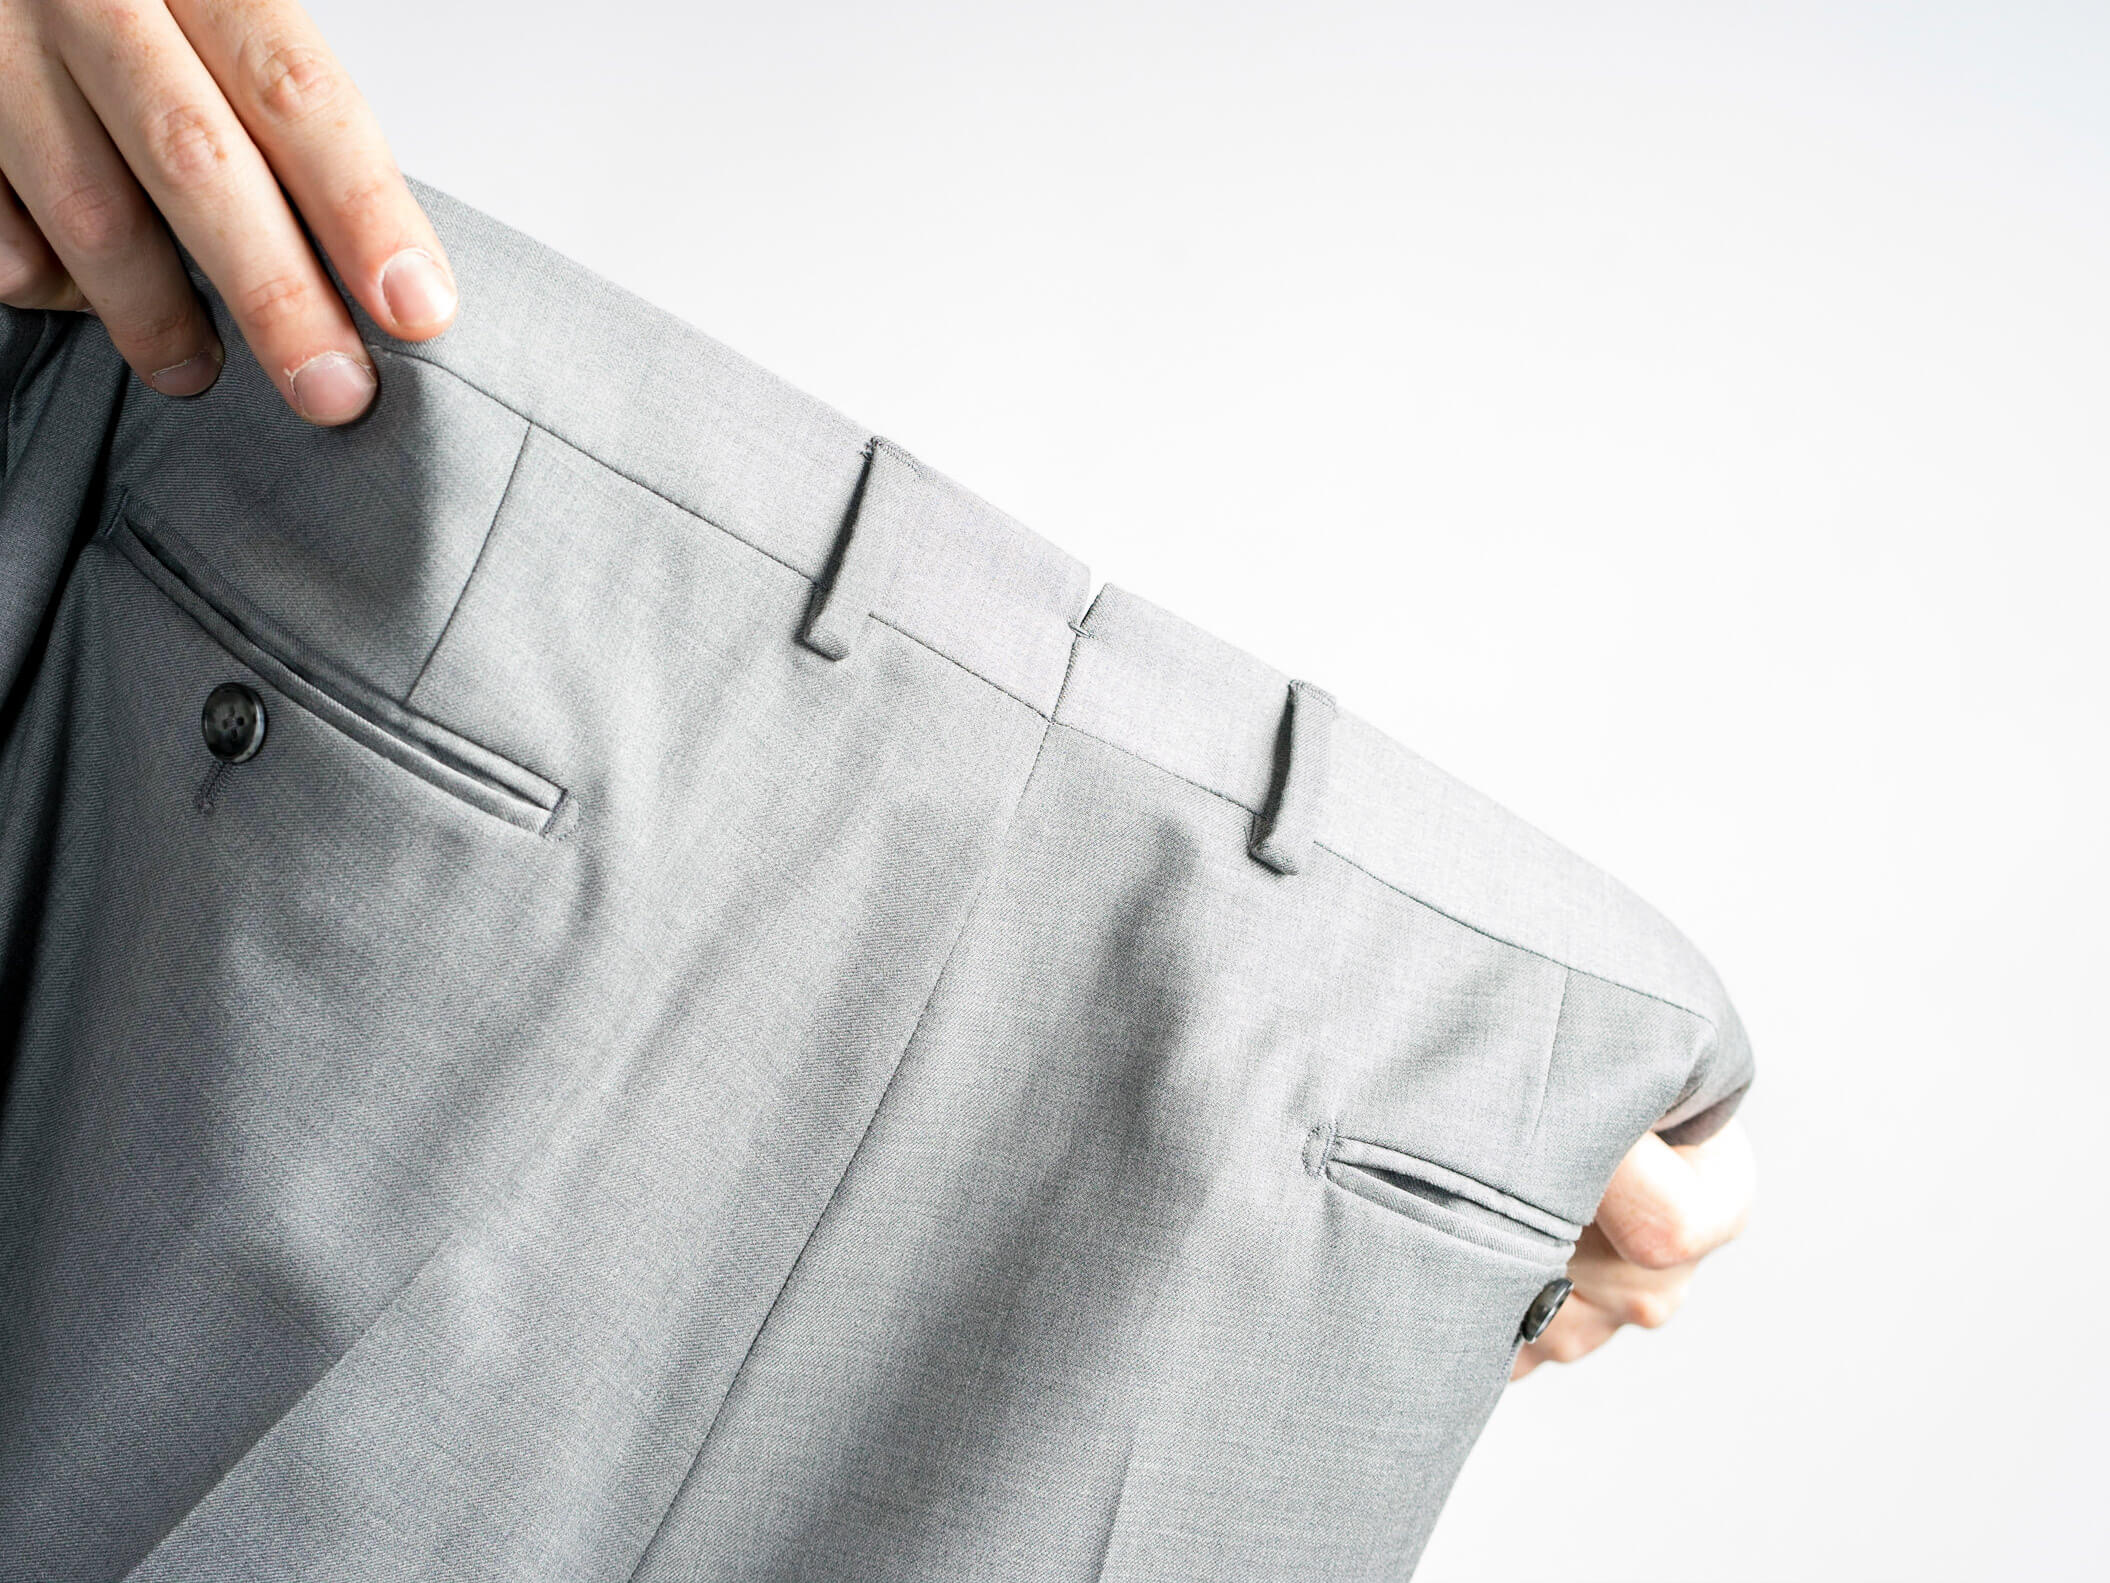 What Pant Fabrics Do You Like For Summer? - Blogs & Forums